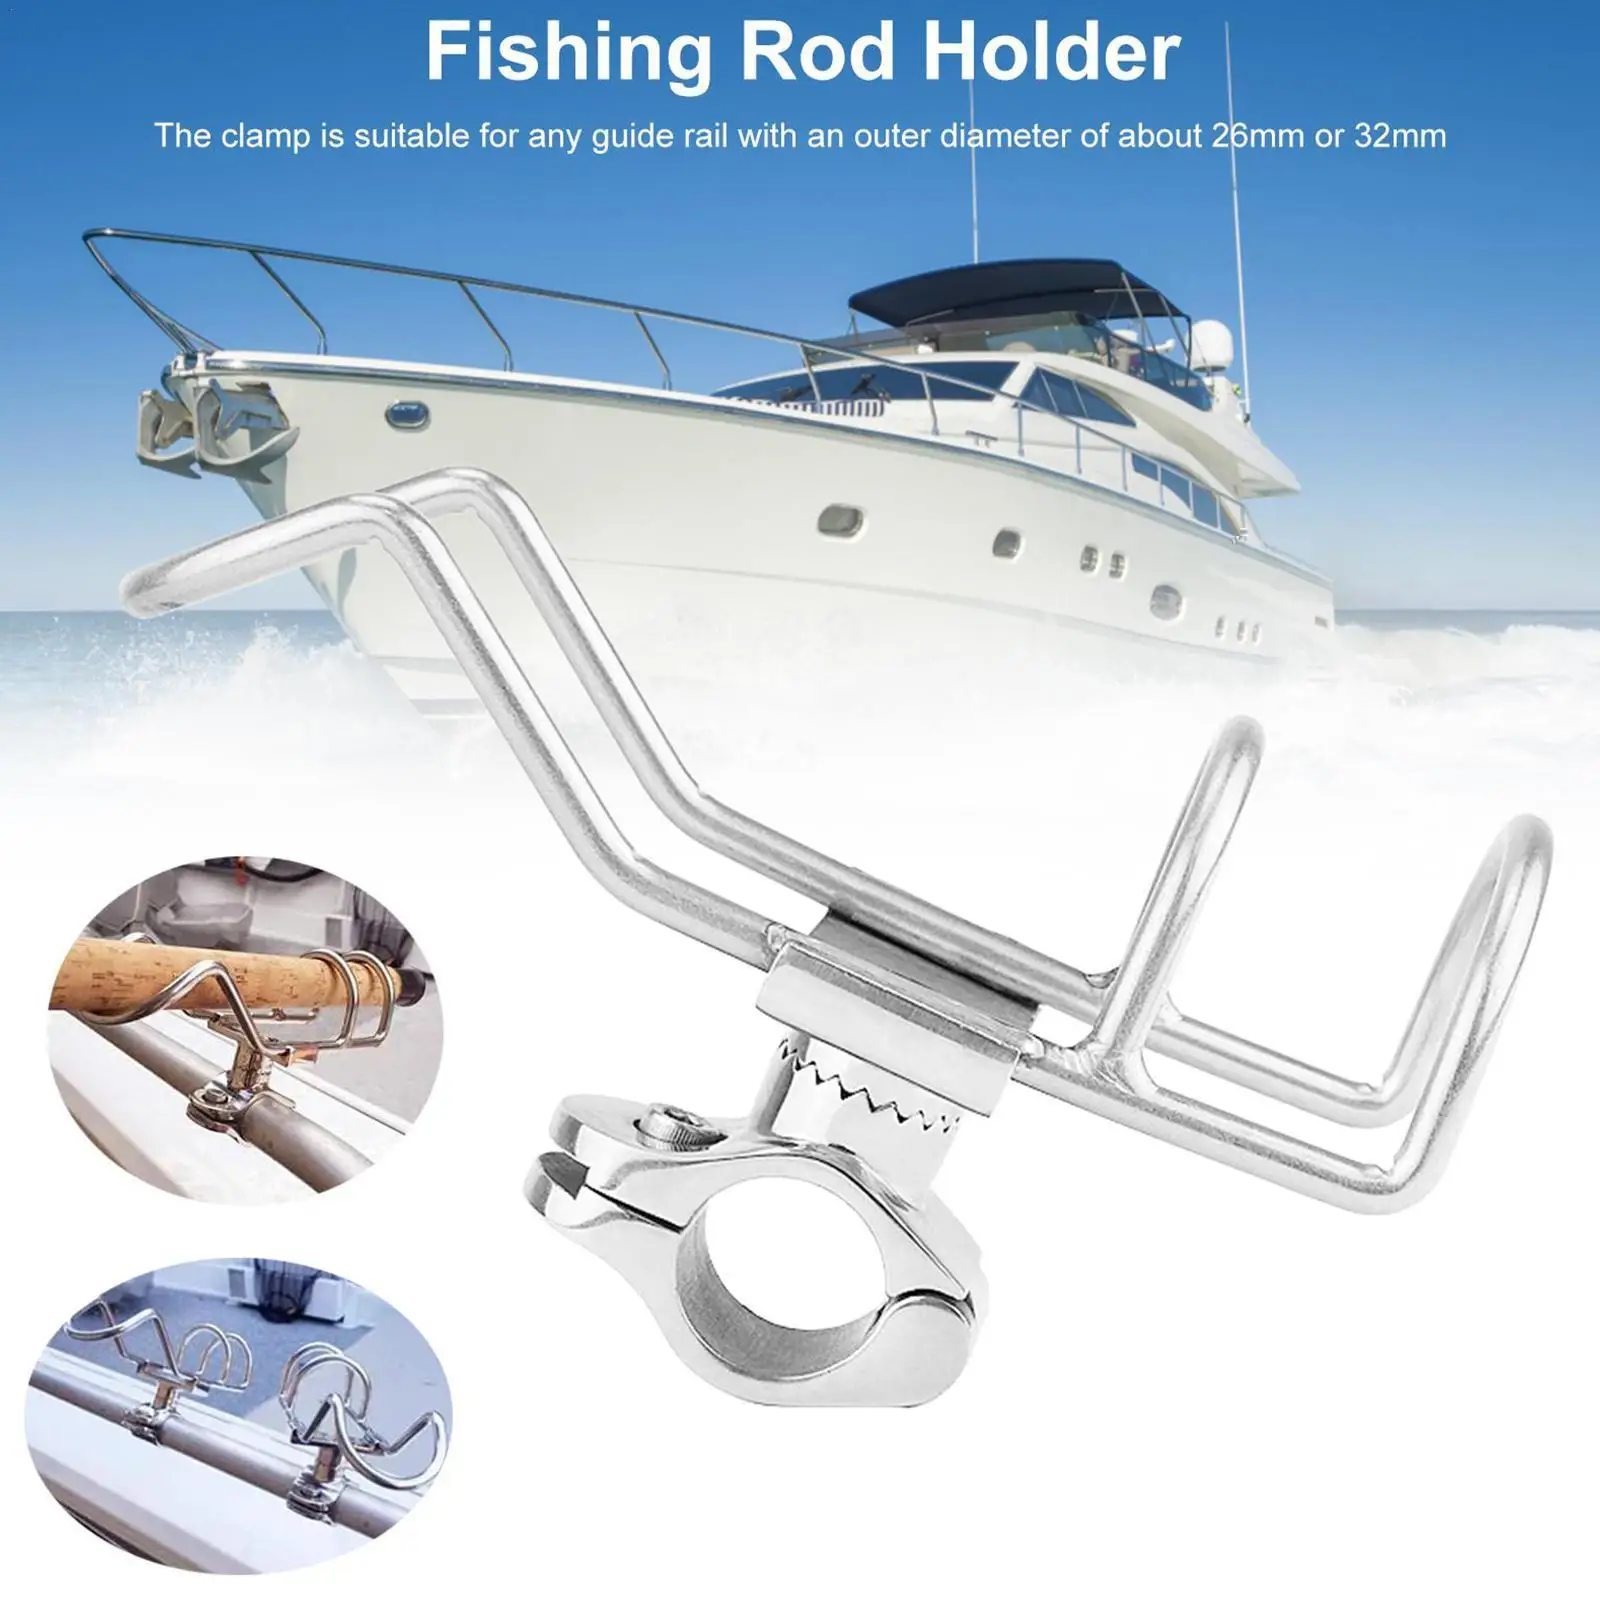 Marine Grade Steel 316 fishing rod rack holder pole bracket support clamp on rail mount 25or 32mm boat Accessories